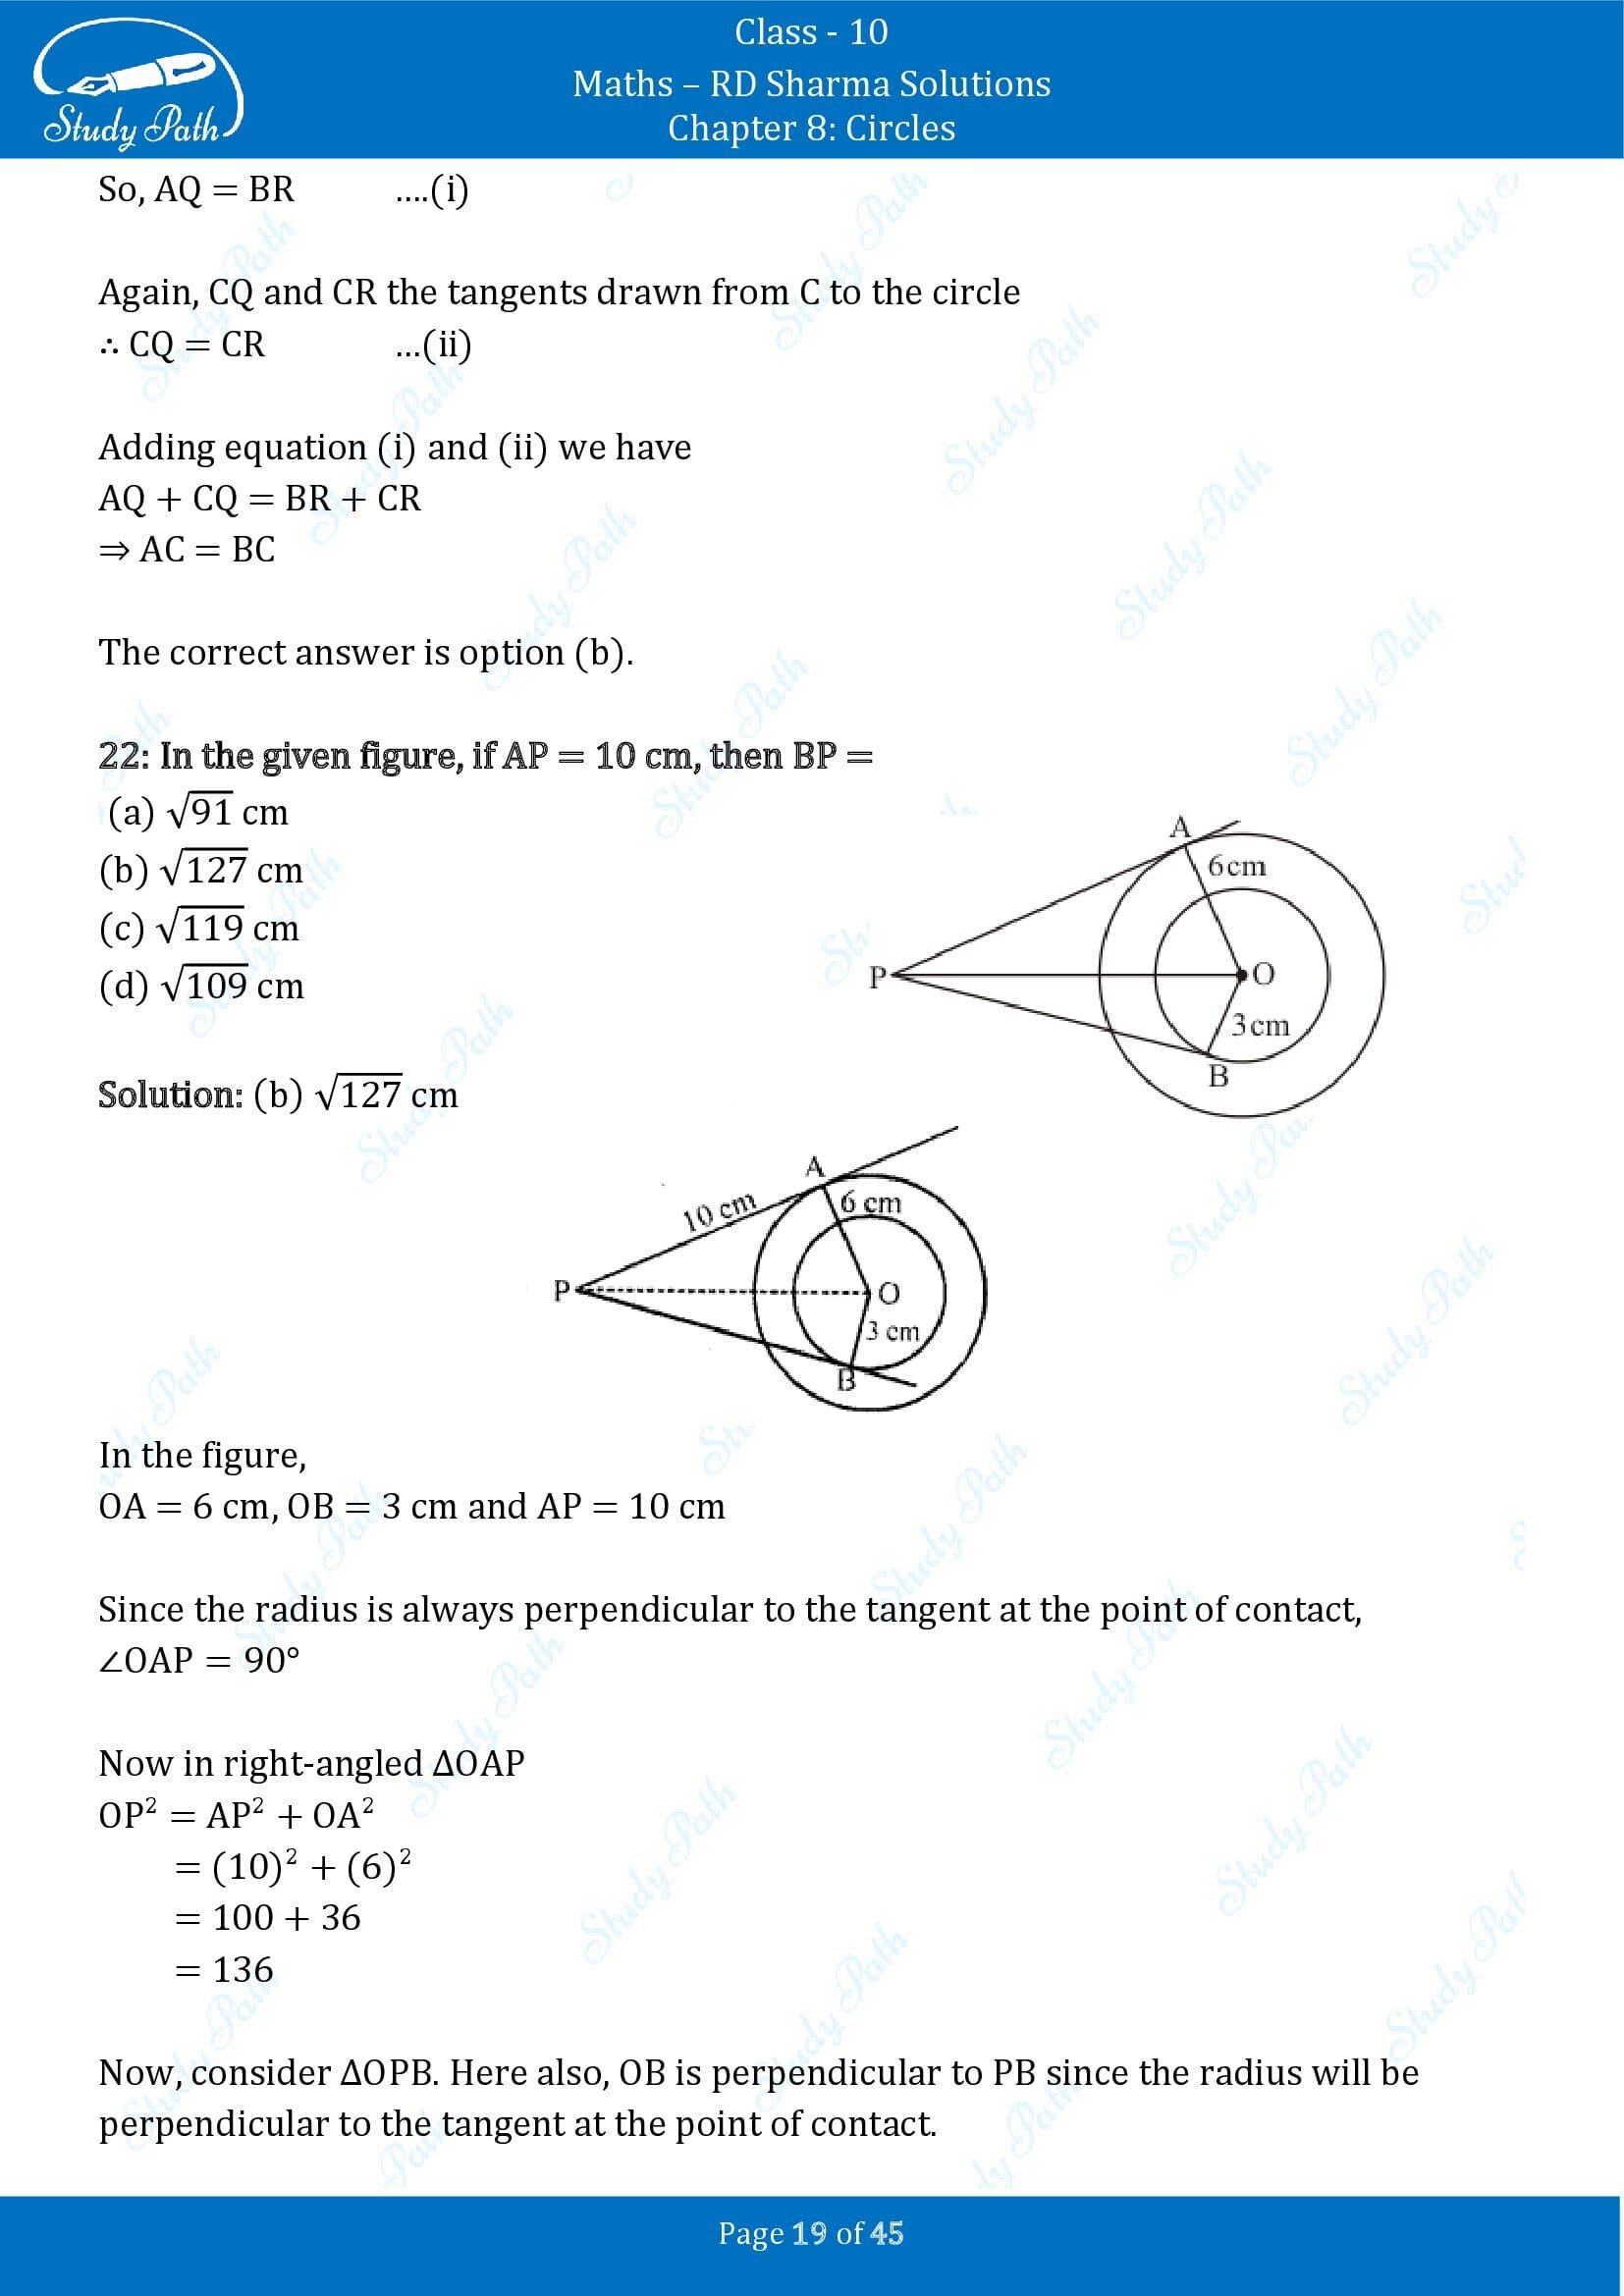 RD Sharma Solutions Class 10 Chapter 8 Circles Multiple Choice Questions MCQs 00019